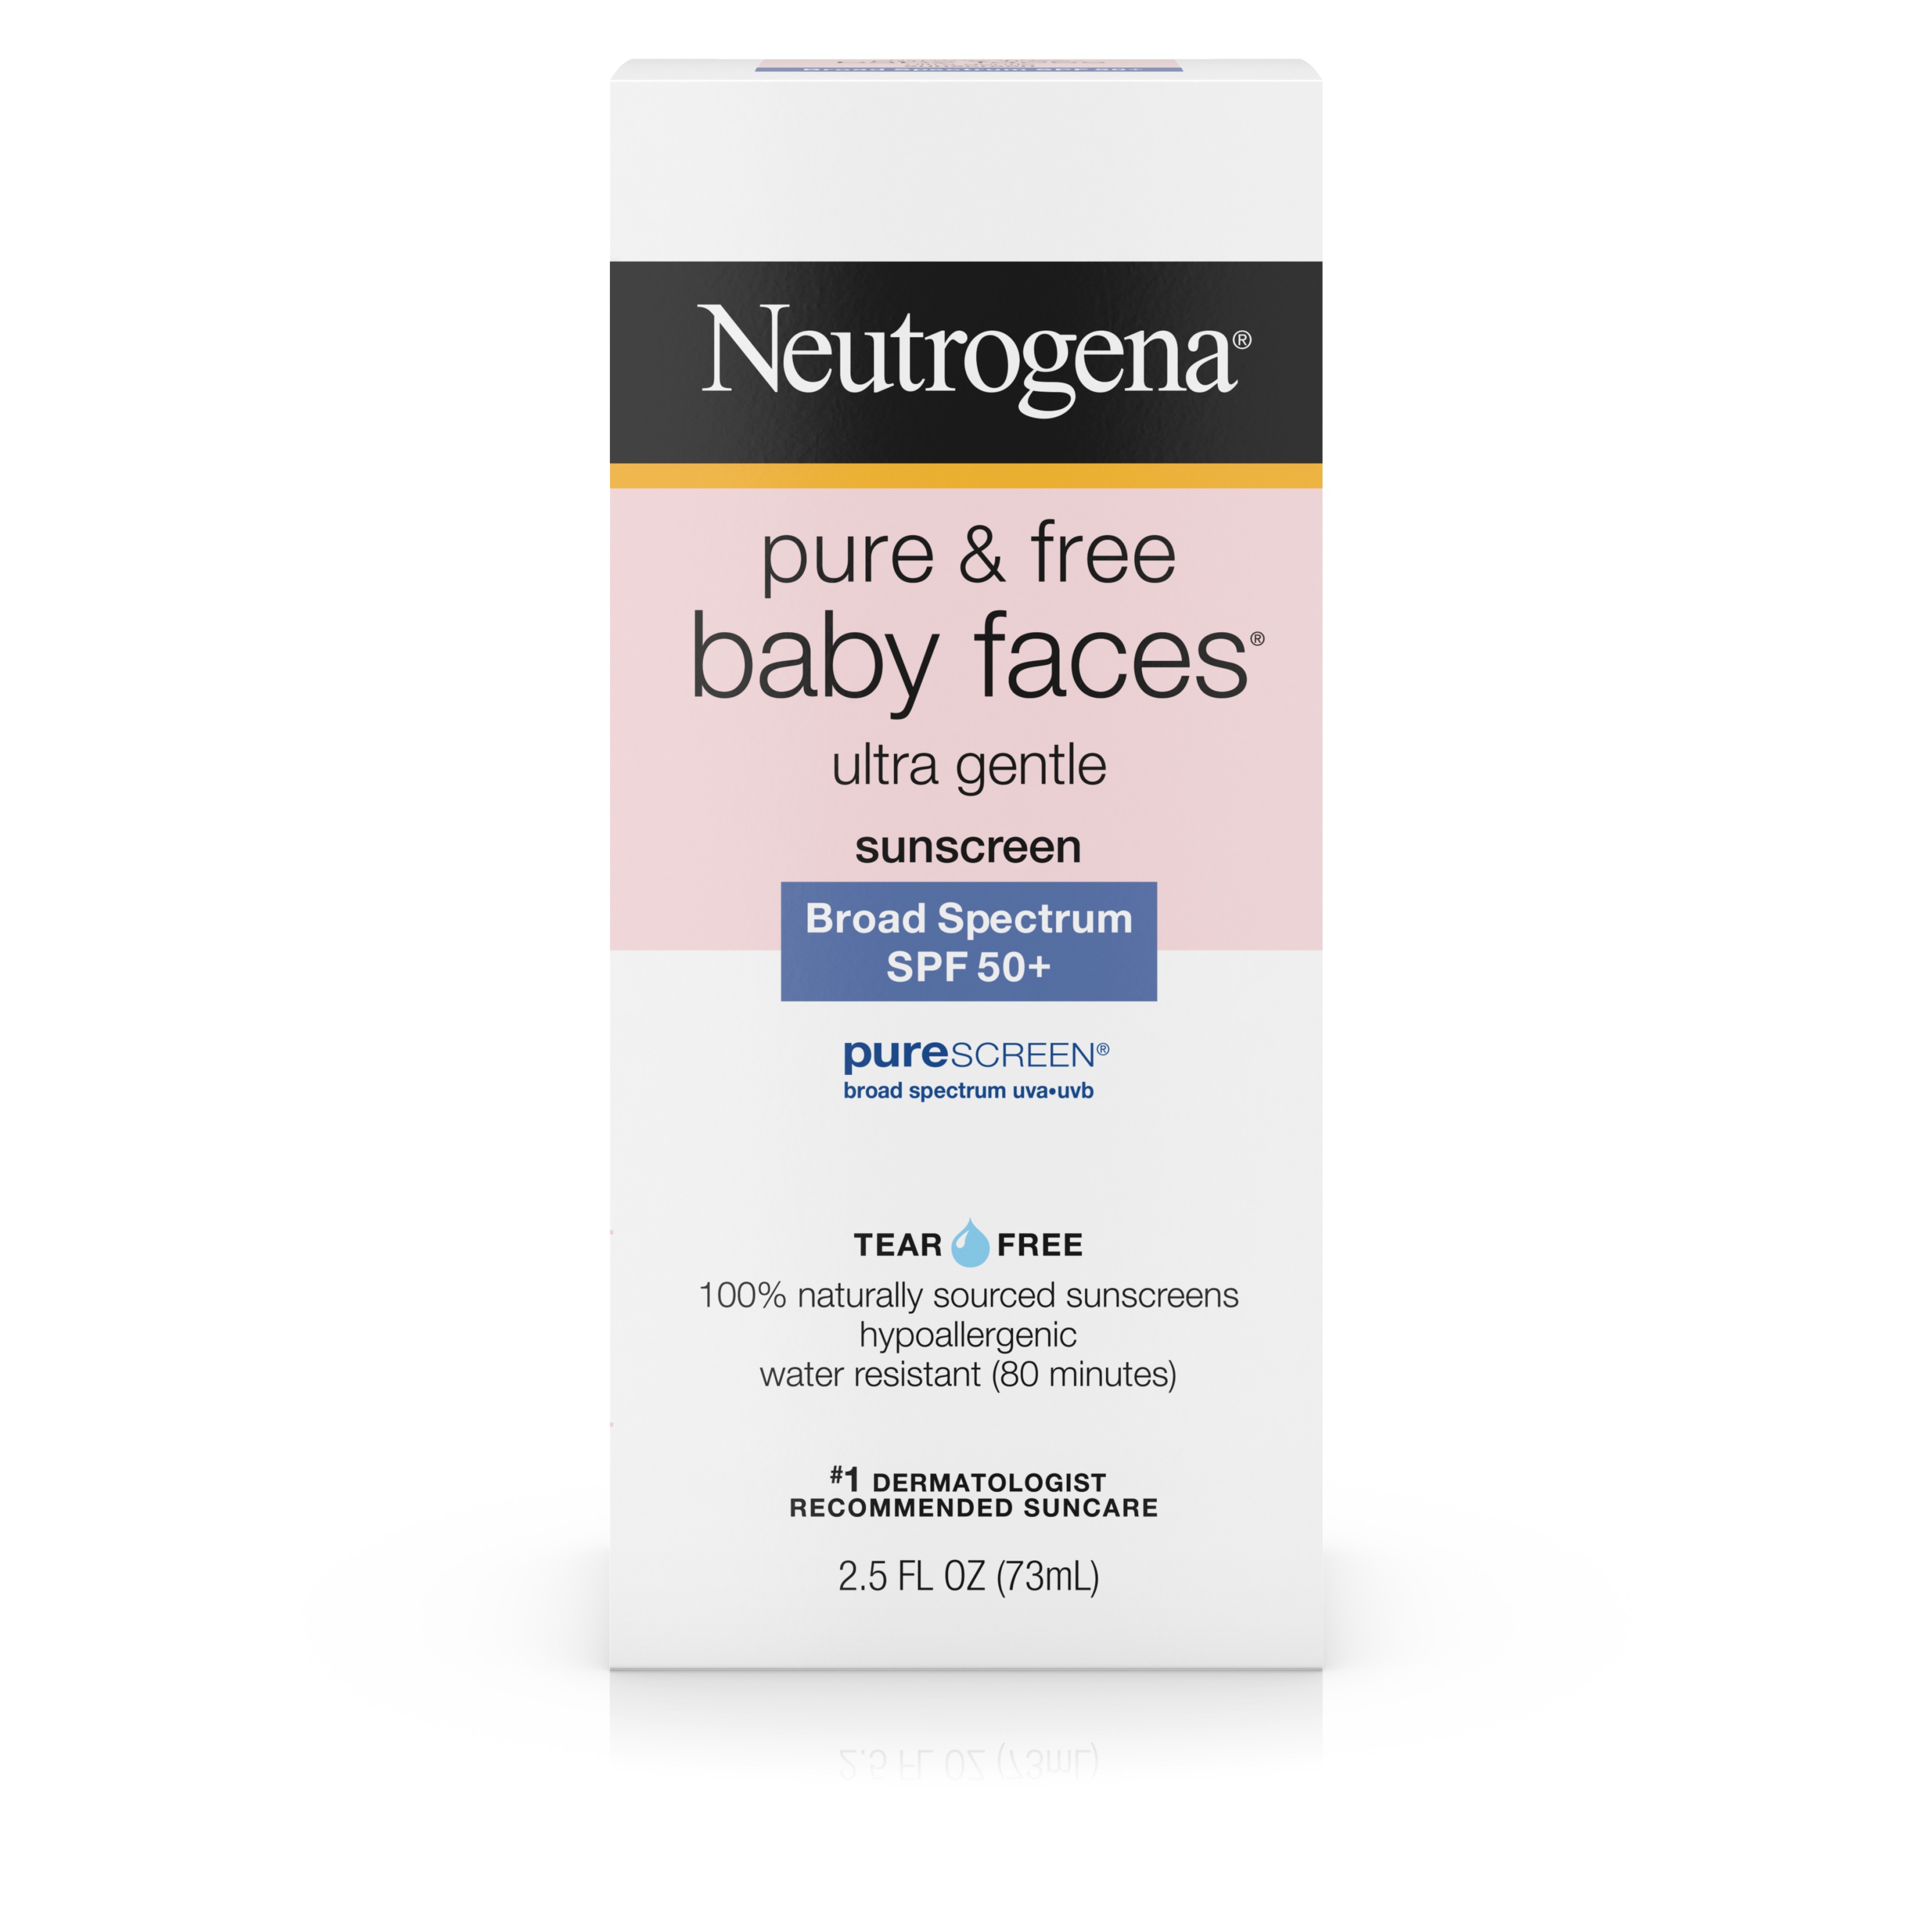 Neutrogena Pure & Free Baby Faces Ultra Gentle Sunscreen Broad Spectrum SPF 45+, 2.5 Oz - image 1 of 6